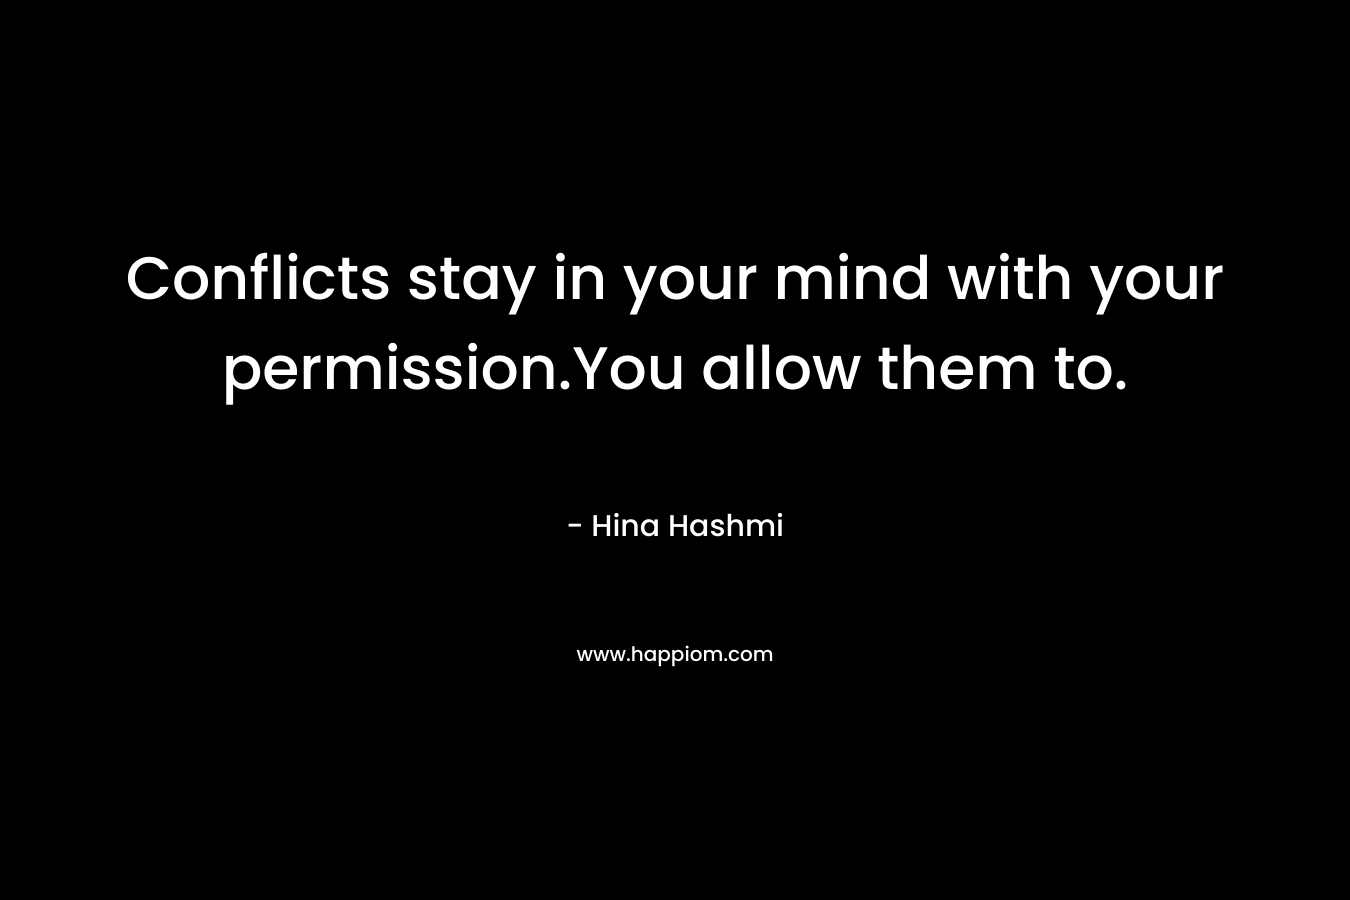 Conflicts stay in your mind with your permission.You allow them to.